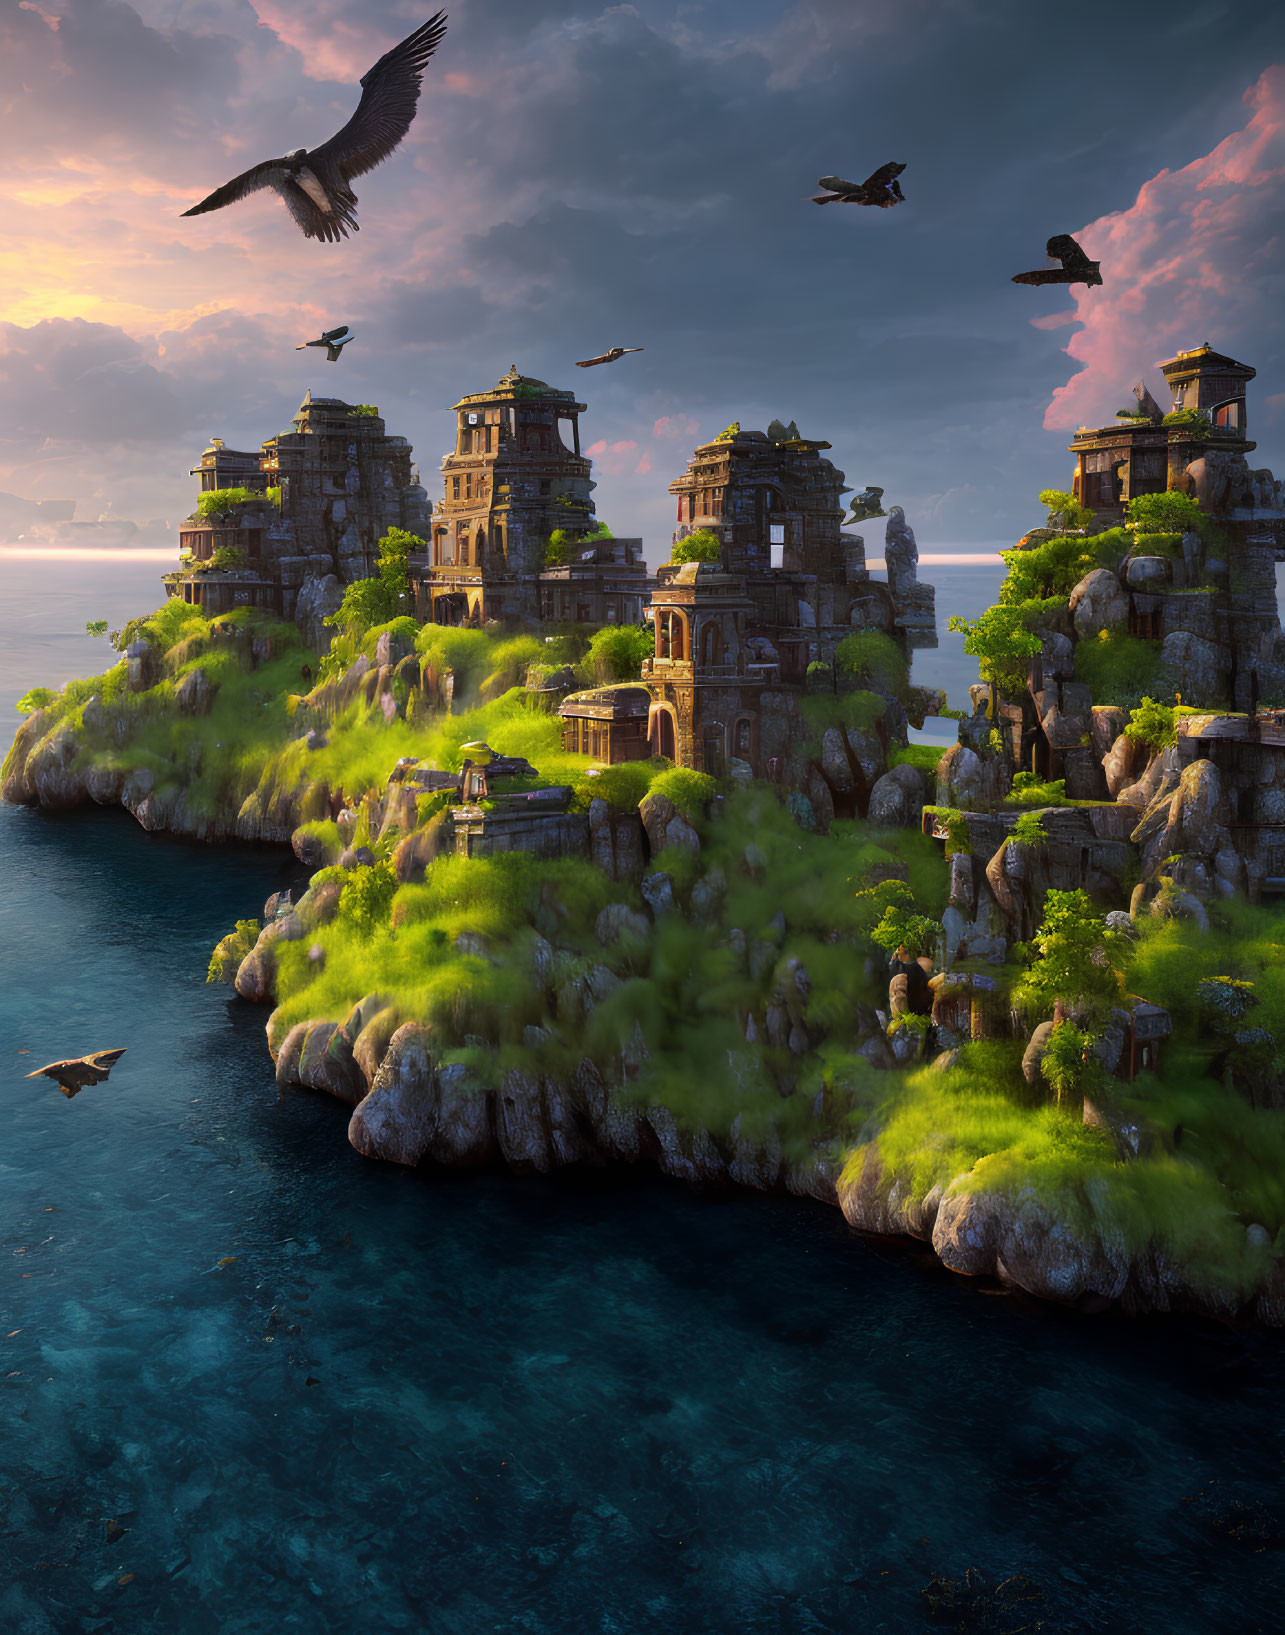 Ancient overgrown ruins on rocky coastline with birds flying over tranquil sea at golden hour